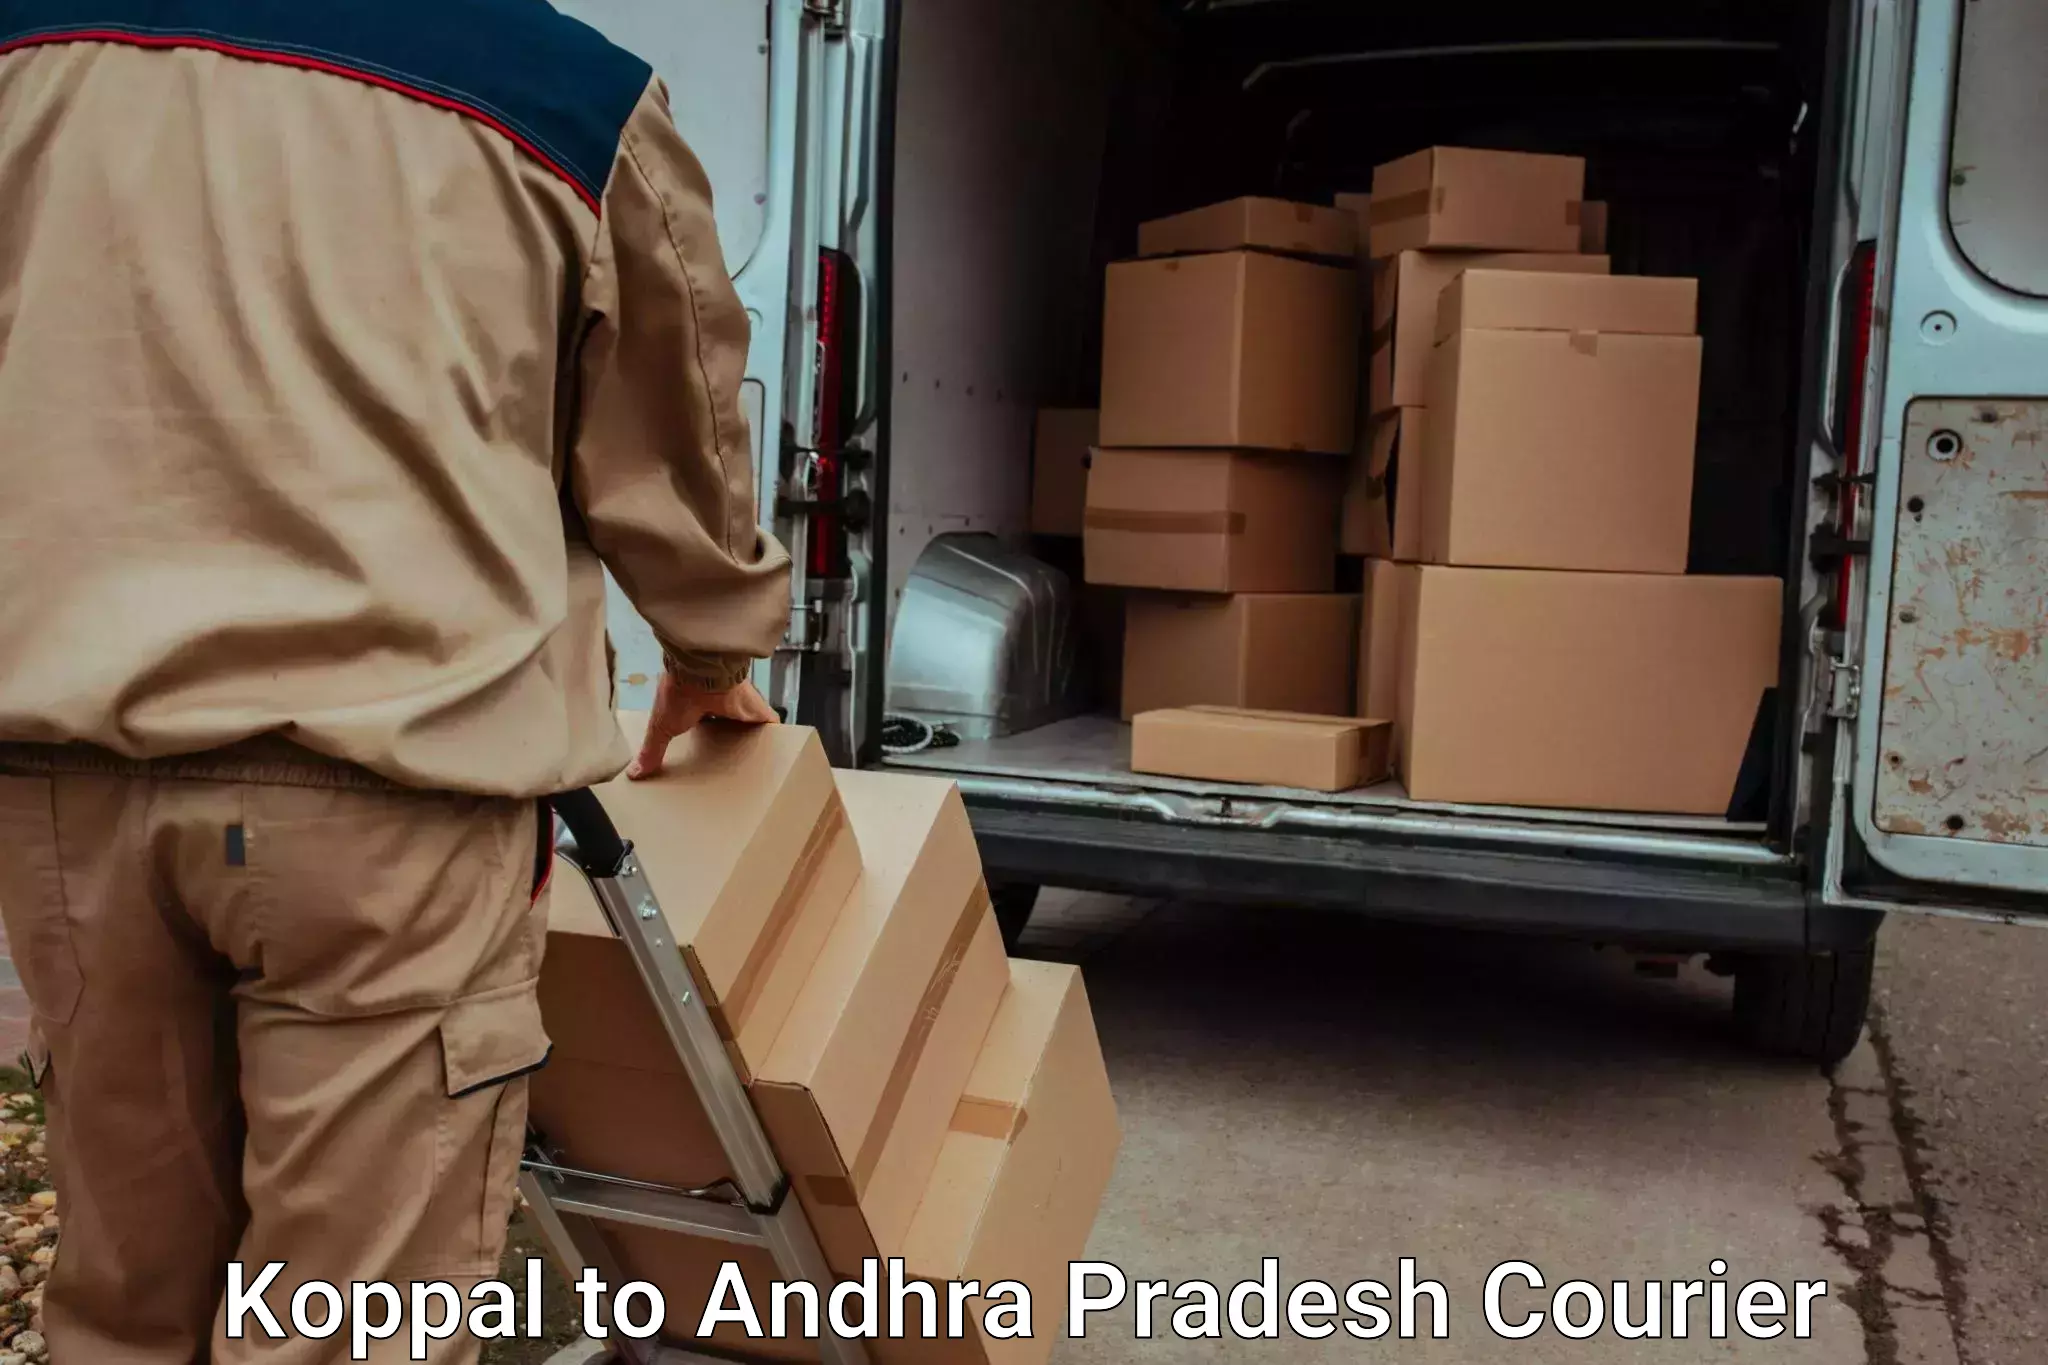 Luggage delivery app Koppal to Vempalli